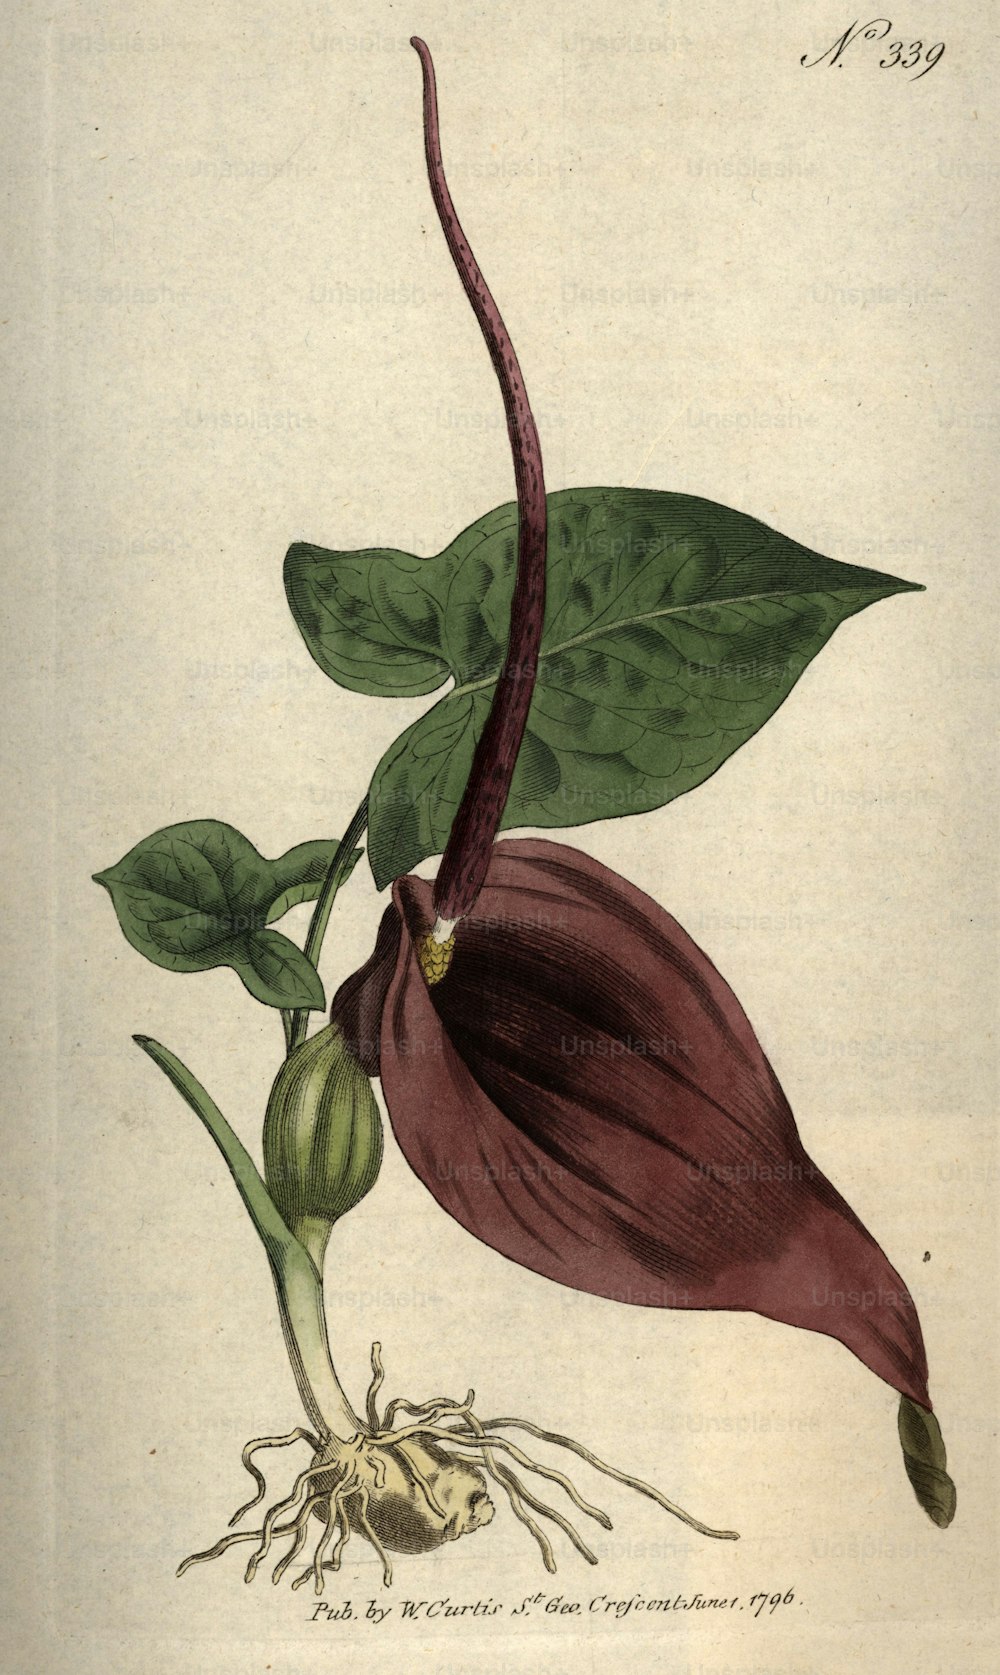 1796:  A large-leaved exotic flower.  W Curtis' Botanical magazine - pub. 1796  (Photo by Hulton Archive/Getty Images)